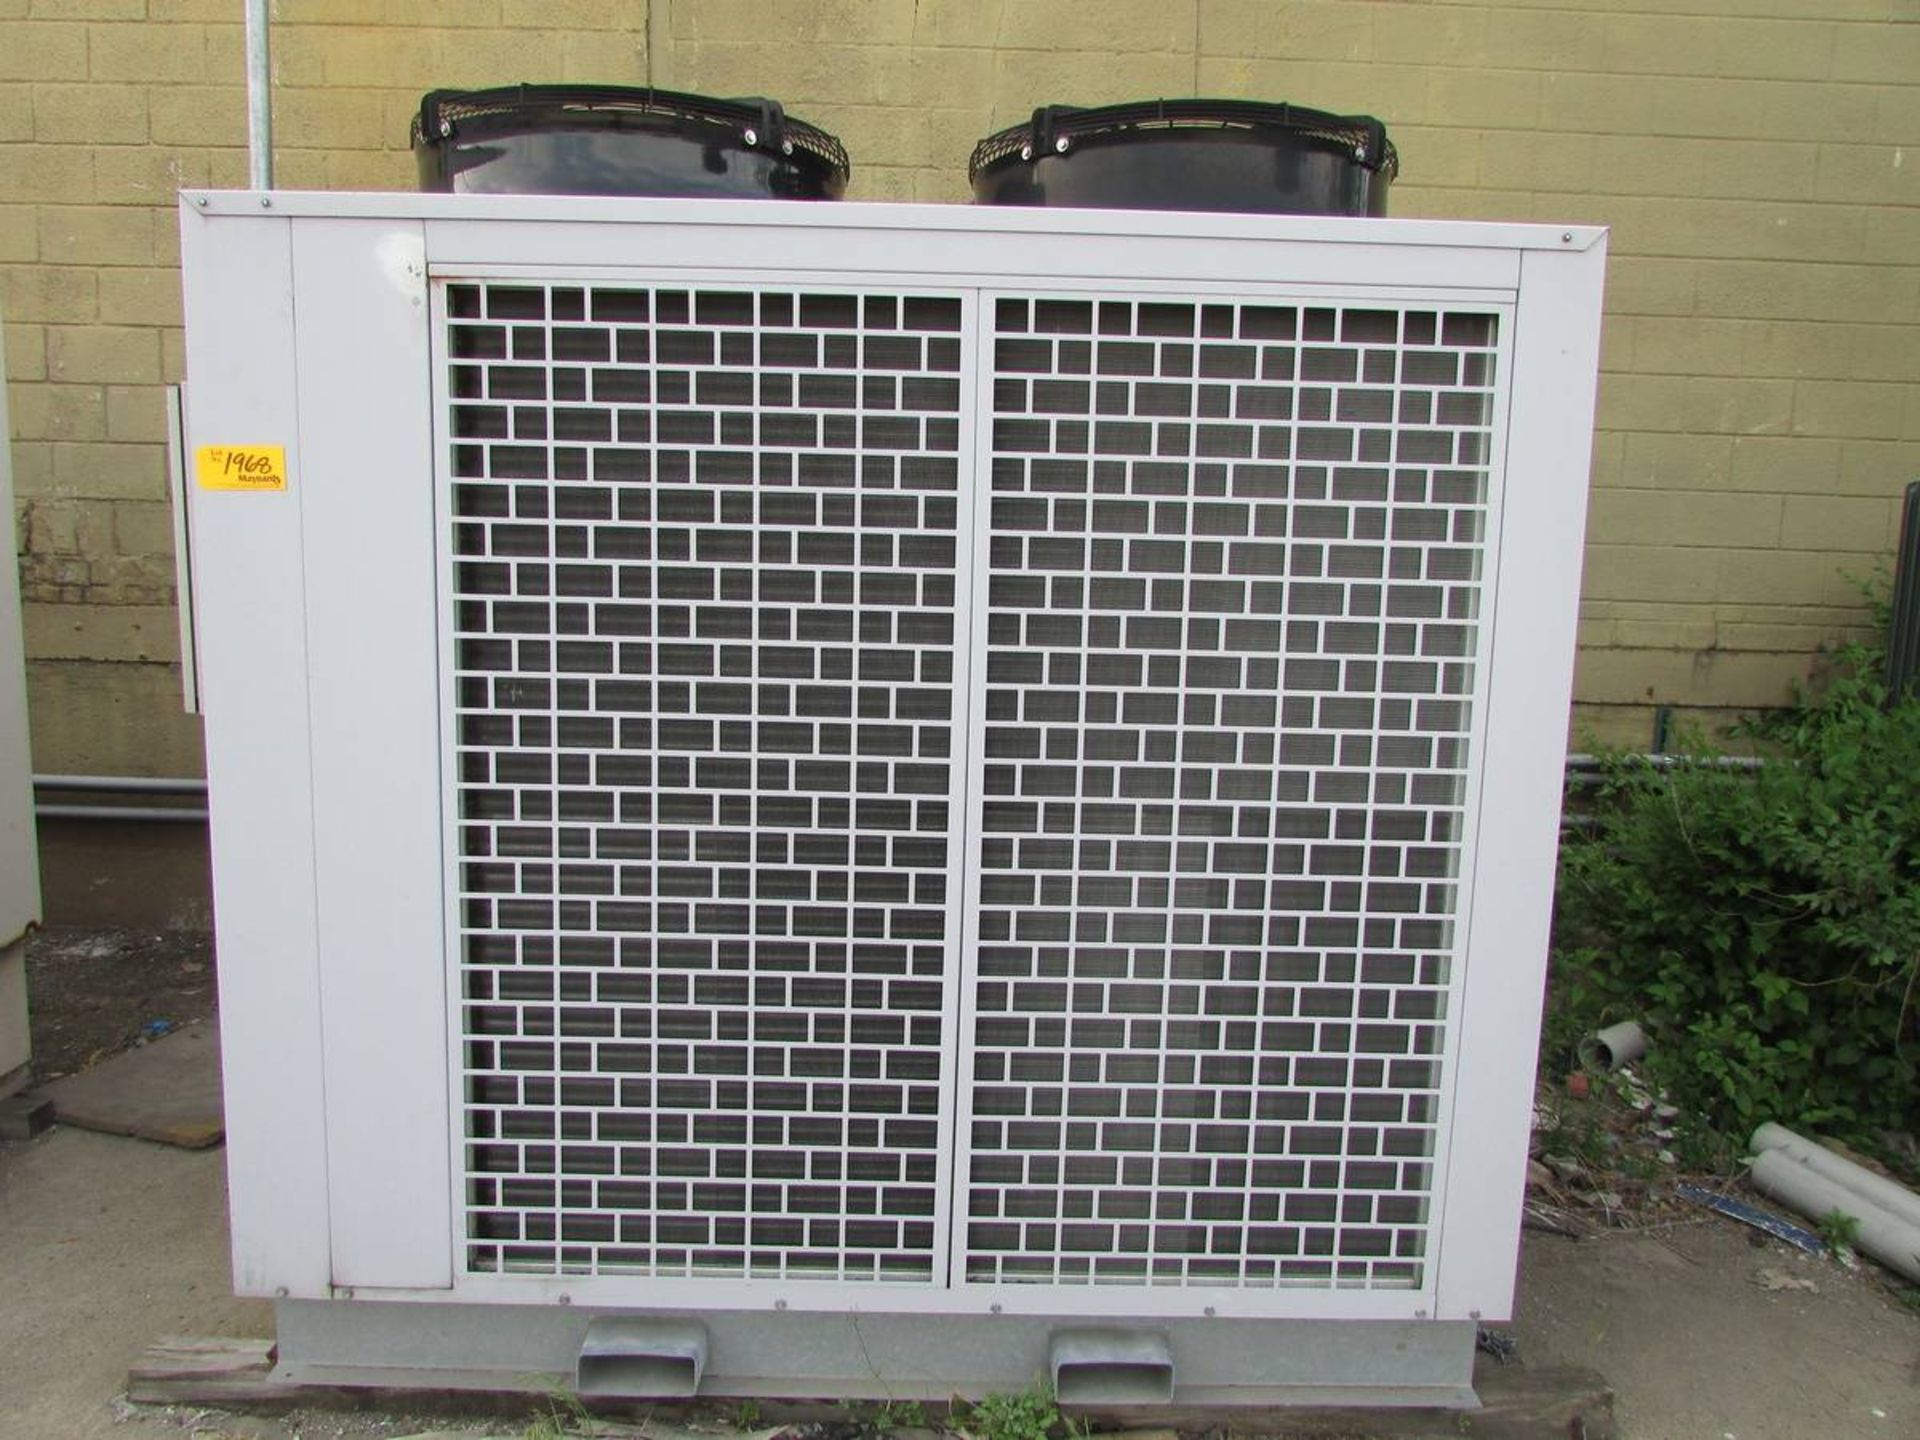 Fluid Chillers Inc AIR 3500 Refrigerated Chiller - Image 2 of 7